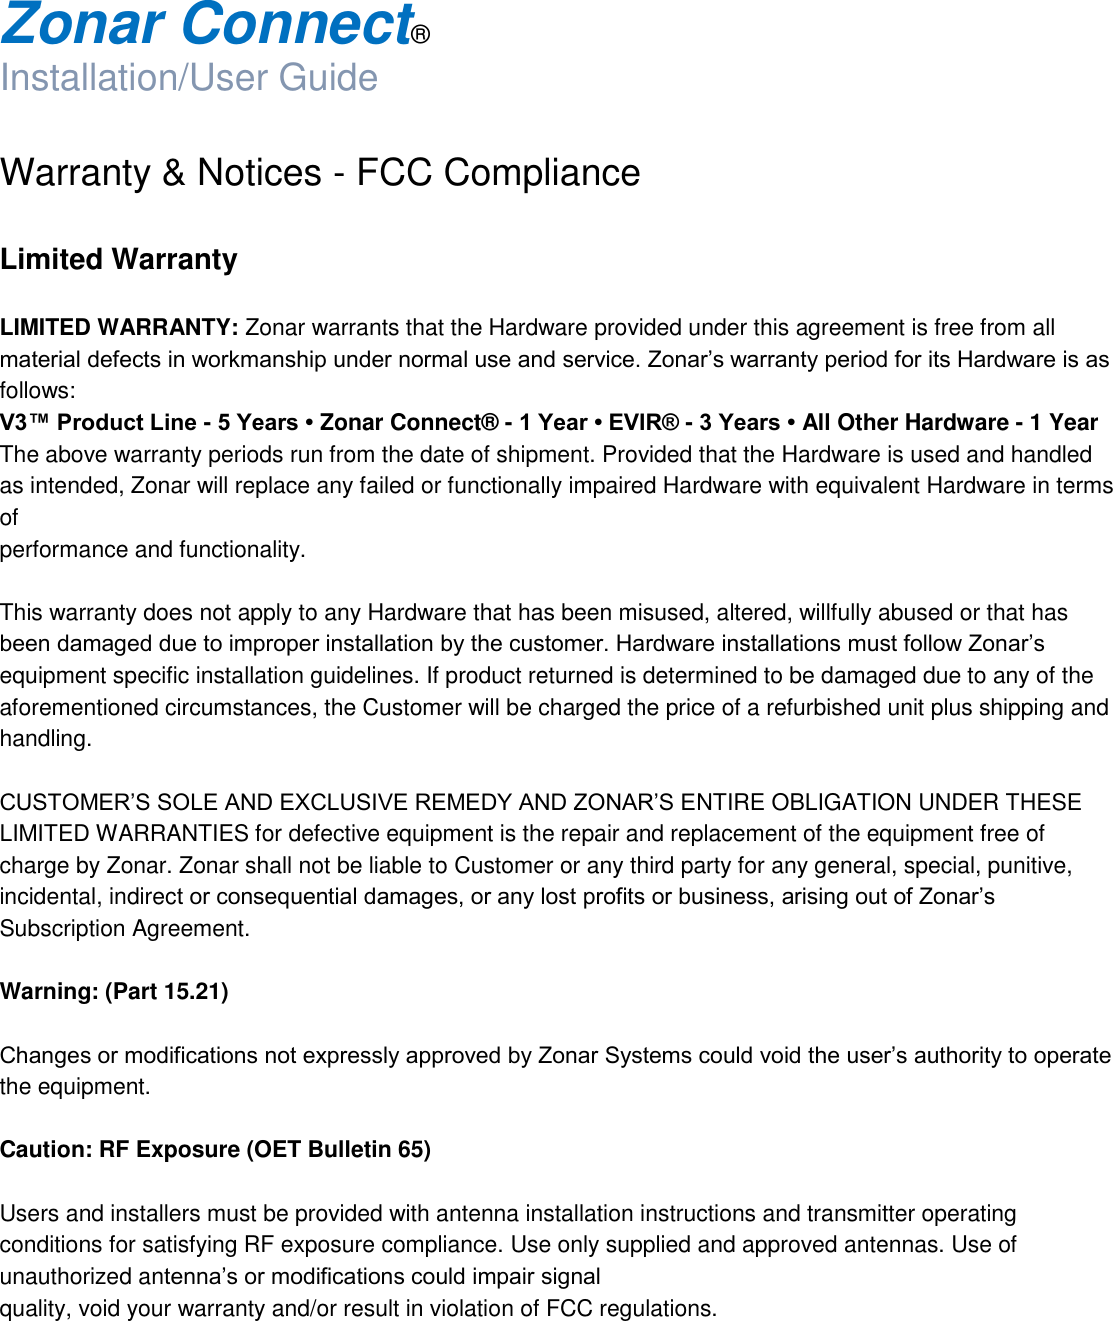  Zonar Connect®  Installation/User Guide  Warranty &amp; Notices - FCC Compliance  Limited Warranty   LIMITED WARRANTY: Zonar warrants that the Hardware provided under this agreement is free from all material defects in workmanship under normal use and service. Zonar’s warranty period for its Hardware is as follows: V3™ Product Line - 5 Years • Zonar Connect® - 1 Year • EVIR® - 3 Years • All Other Hardware - 1 Year The above warranty periods run from the date of shipment. Provided that the Hardware is used and handled as intended, Zonar will replace any failed or functionally impaired Hardware with equivalent Hardware in terms of performance and functionality.  This warranty does not apply to any Hardware that has been misused, altered, willfully abused or that has been damaged due to improper installation by the customer. Hardware installations must follow Zonar’s equipment specific installation guidelines. If product returned is determined to be damaged due to any of the aforementioned circumstances, the Customer will be charged the price of a refurbished unit plus shipping and handling.  CUSTOMER’S SOLE AND EXCLUSIVE REMEDY AND ZONAR’S ENTIRE OBLIGATION UNDER THESE LIMITED WARRANTIES for defective equipment is the repair and replacement of the equipment free of charge by Zonar. Zonar shall not be liable to Customer or any third party for any general, special, punitive, incidental, indirect or consequential damages, or any lost profits or business, arising out of Zonar’s Subscription Agreement.  Warning: (Part 15.21)  Changes or modifications not expressly approved by Zonar Systems could void the user’s authority to operate the equipment.  Caution: RF Exposure (OET Bulletin 65)  Users and installers must be provided with antenna installation instructions and transmitter operating conditions for satisfying RF exposure compliance. Use only supplied and approved antennas. Use of unauthorized antenna’s or modifications could impair signal quality, void your warranty and/or result in violation of FCC regulations. 